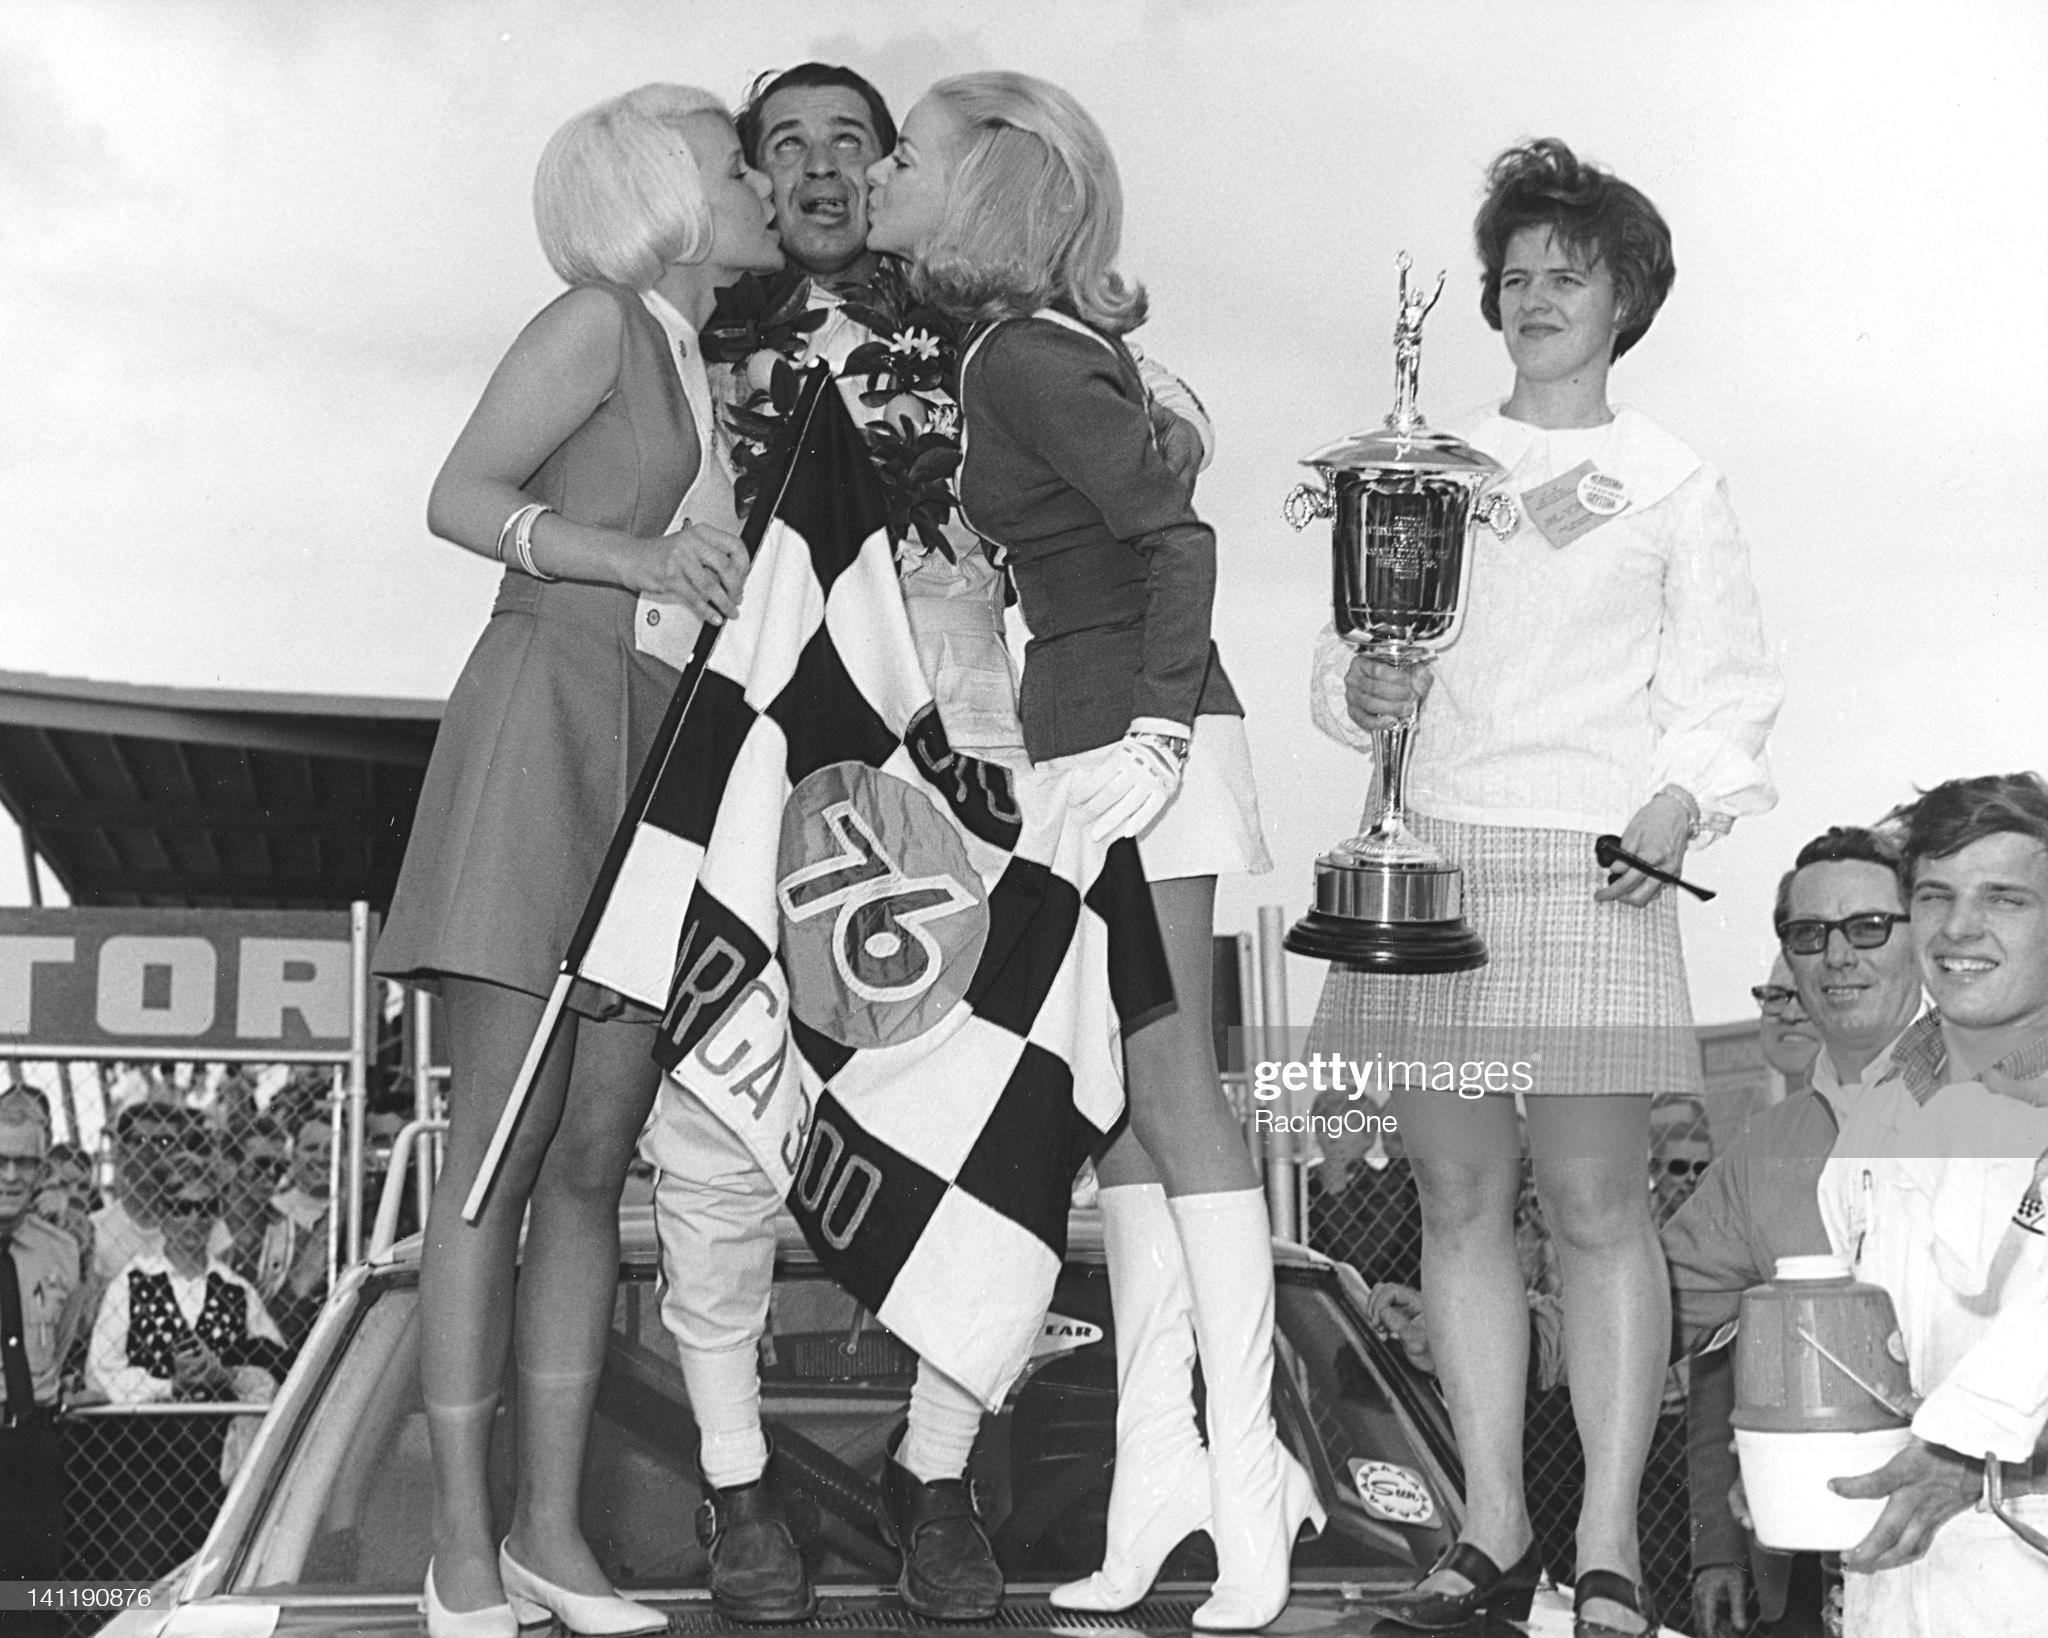 Daytona Beach, Florida, February 15, 1970: Ramo Stott reacts to a double-whammy of kisses from the race queens after winning the ARCA 300 at Daytona International Speedway.